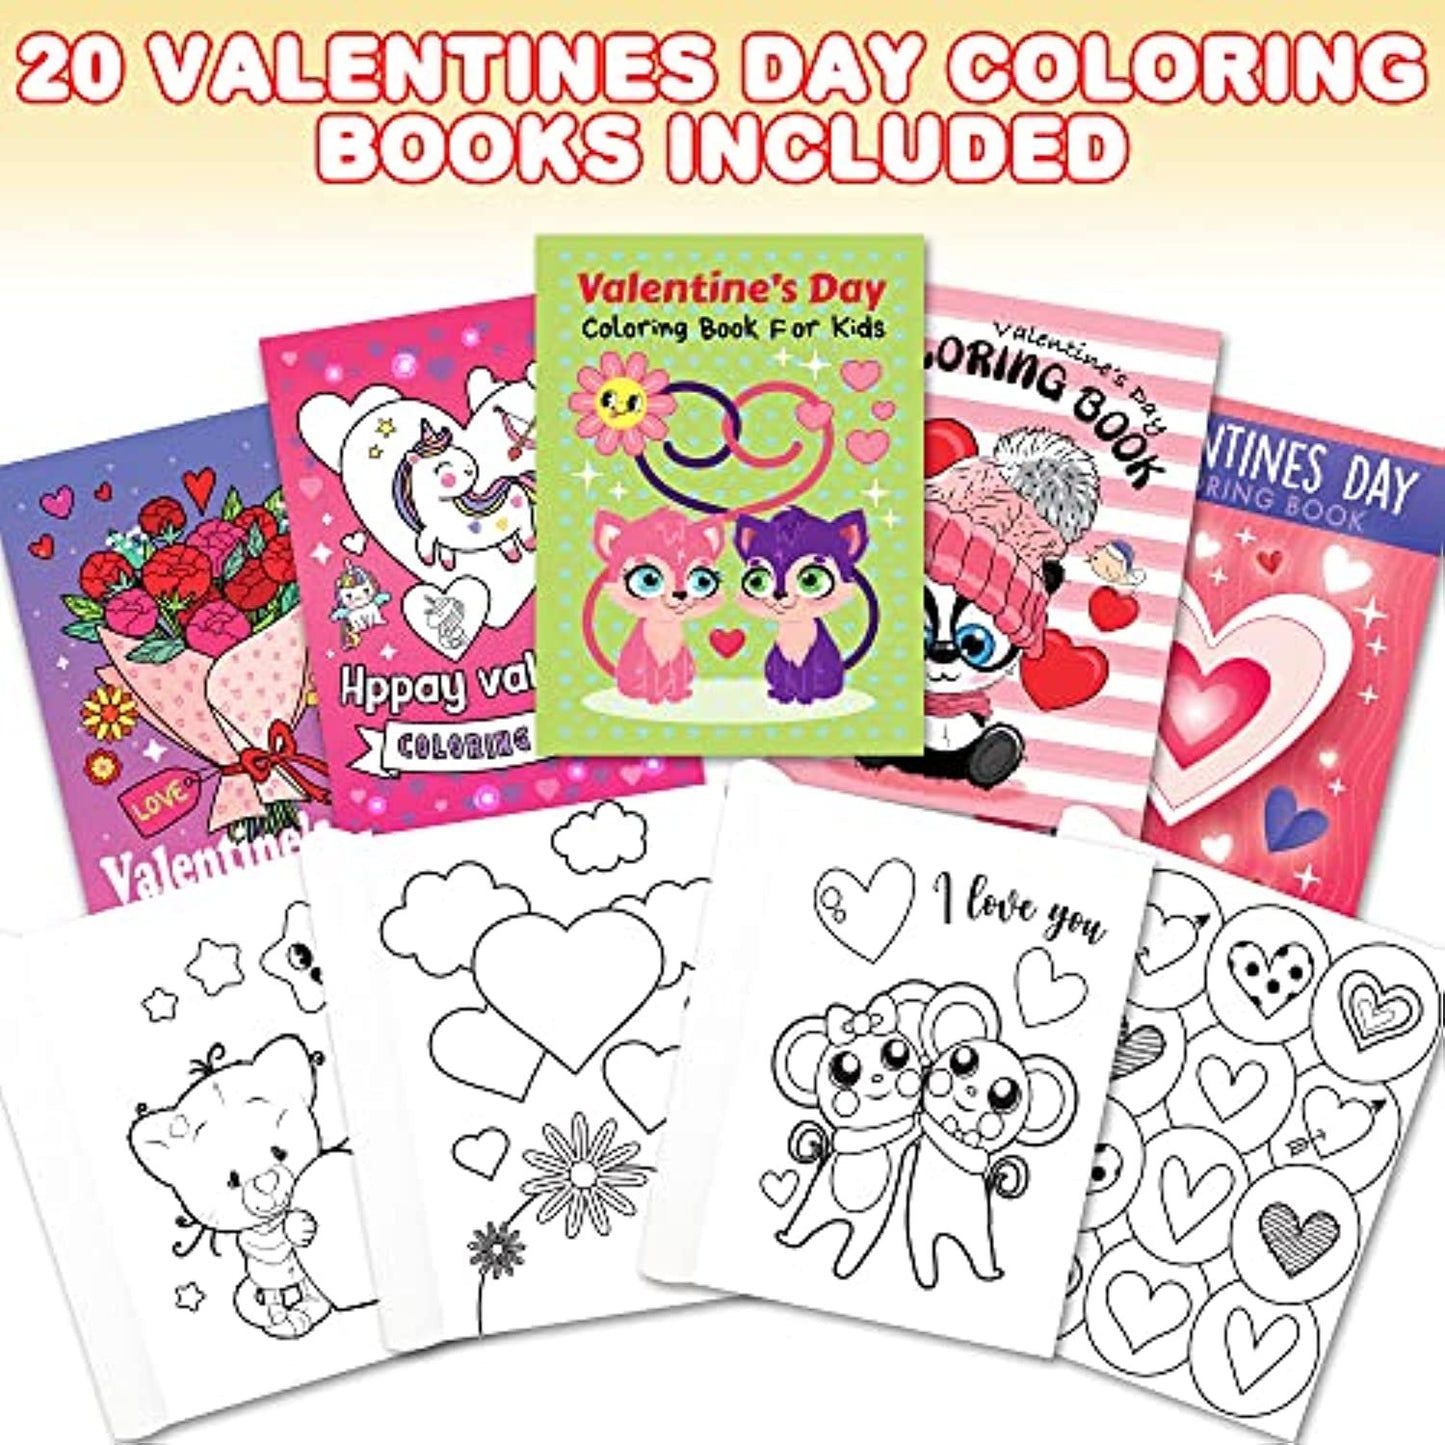 Valentines Day Coloring Books for Kids Bulk, Pack of 20, Small Color Booklets in 5 Designs, Valentine Party Favors for Kids, Educational Valentine Gifts for Kids Classroom, Valentine Treats for Kids